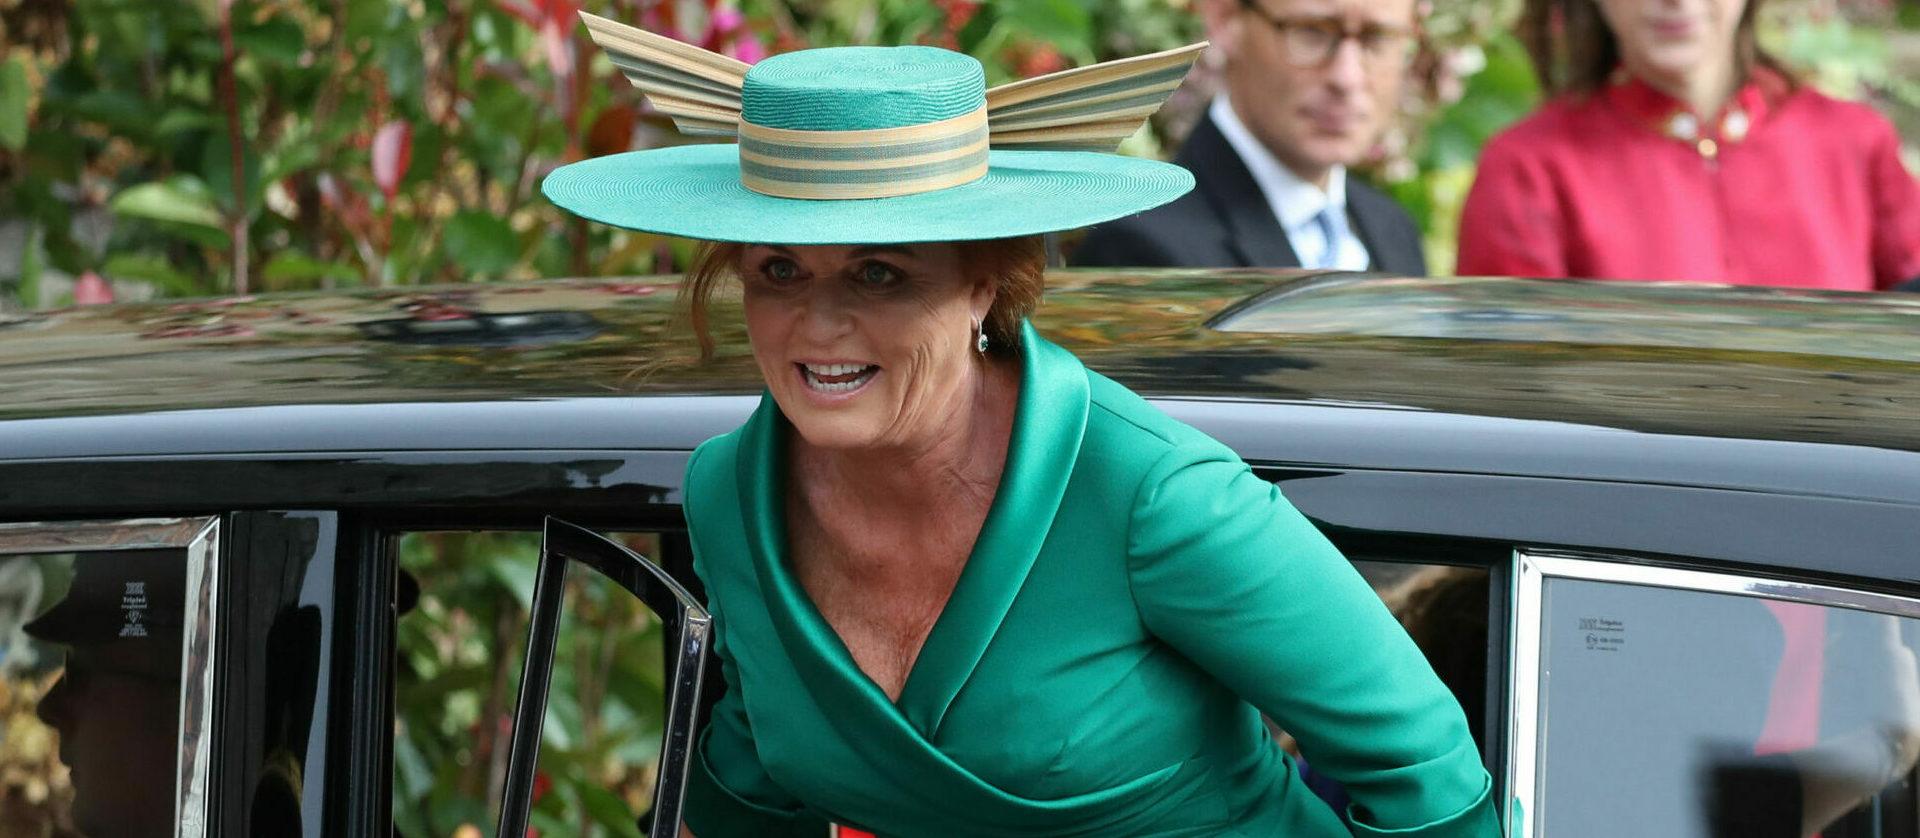 Sarah Ferguson Says She Is ‘Loving’ The Royal Rebel Tag Amid Exclusion From Coronation